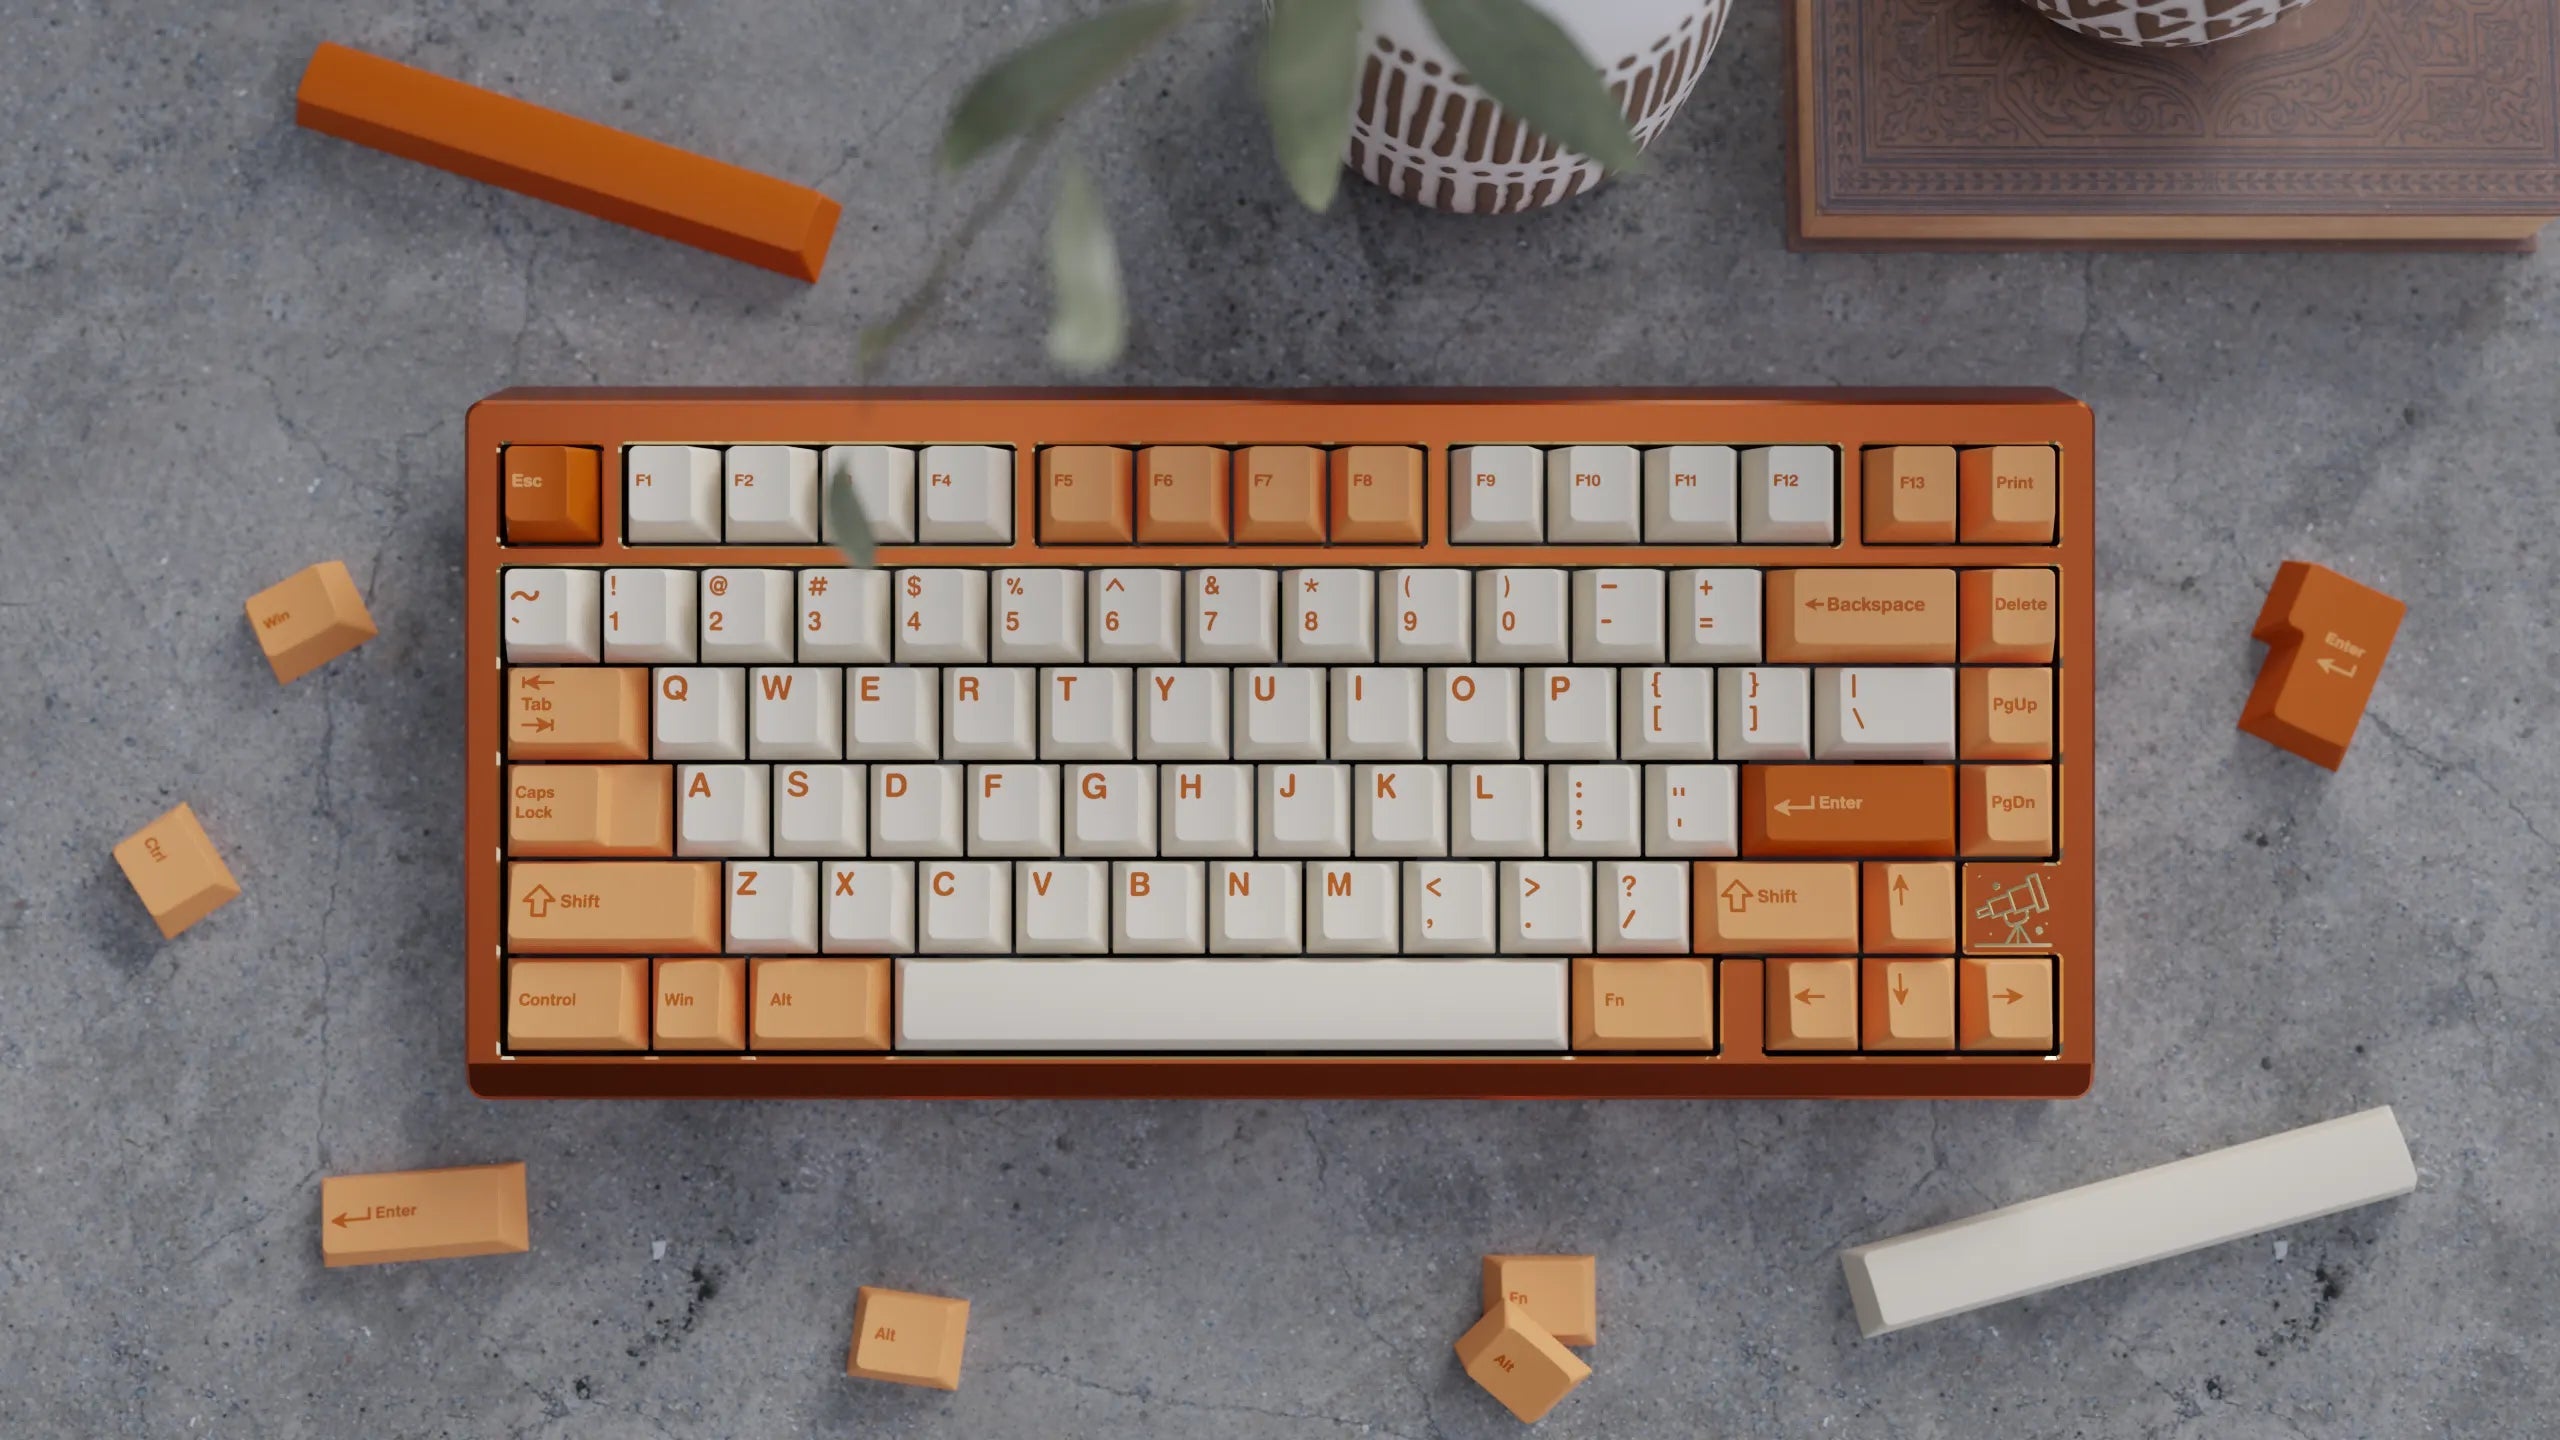 [Group-buy] Zoom75 - WS Sunset Bliss Keycaps - Keebz N CablesKeycaps